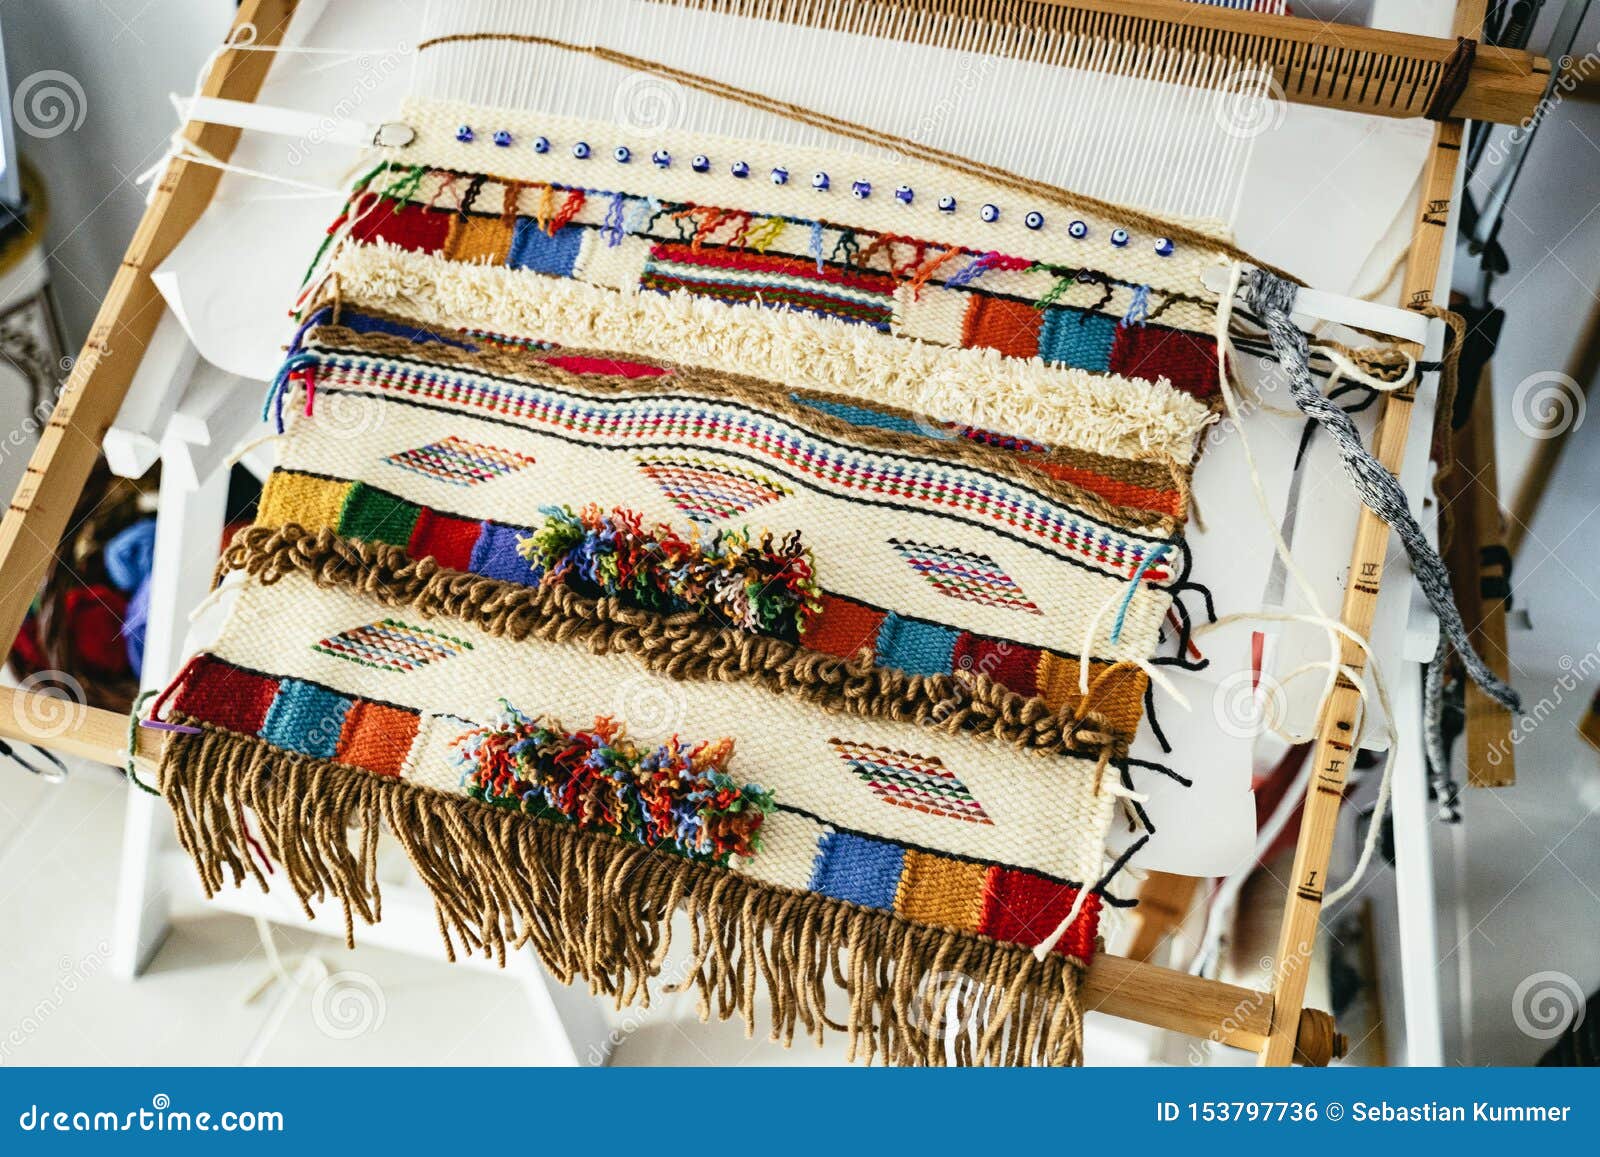 Colorful Hand-woven Tapestry on a Hand Loom Editorial Photo - Image of  horizontal, frame: 153797736